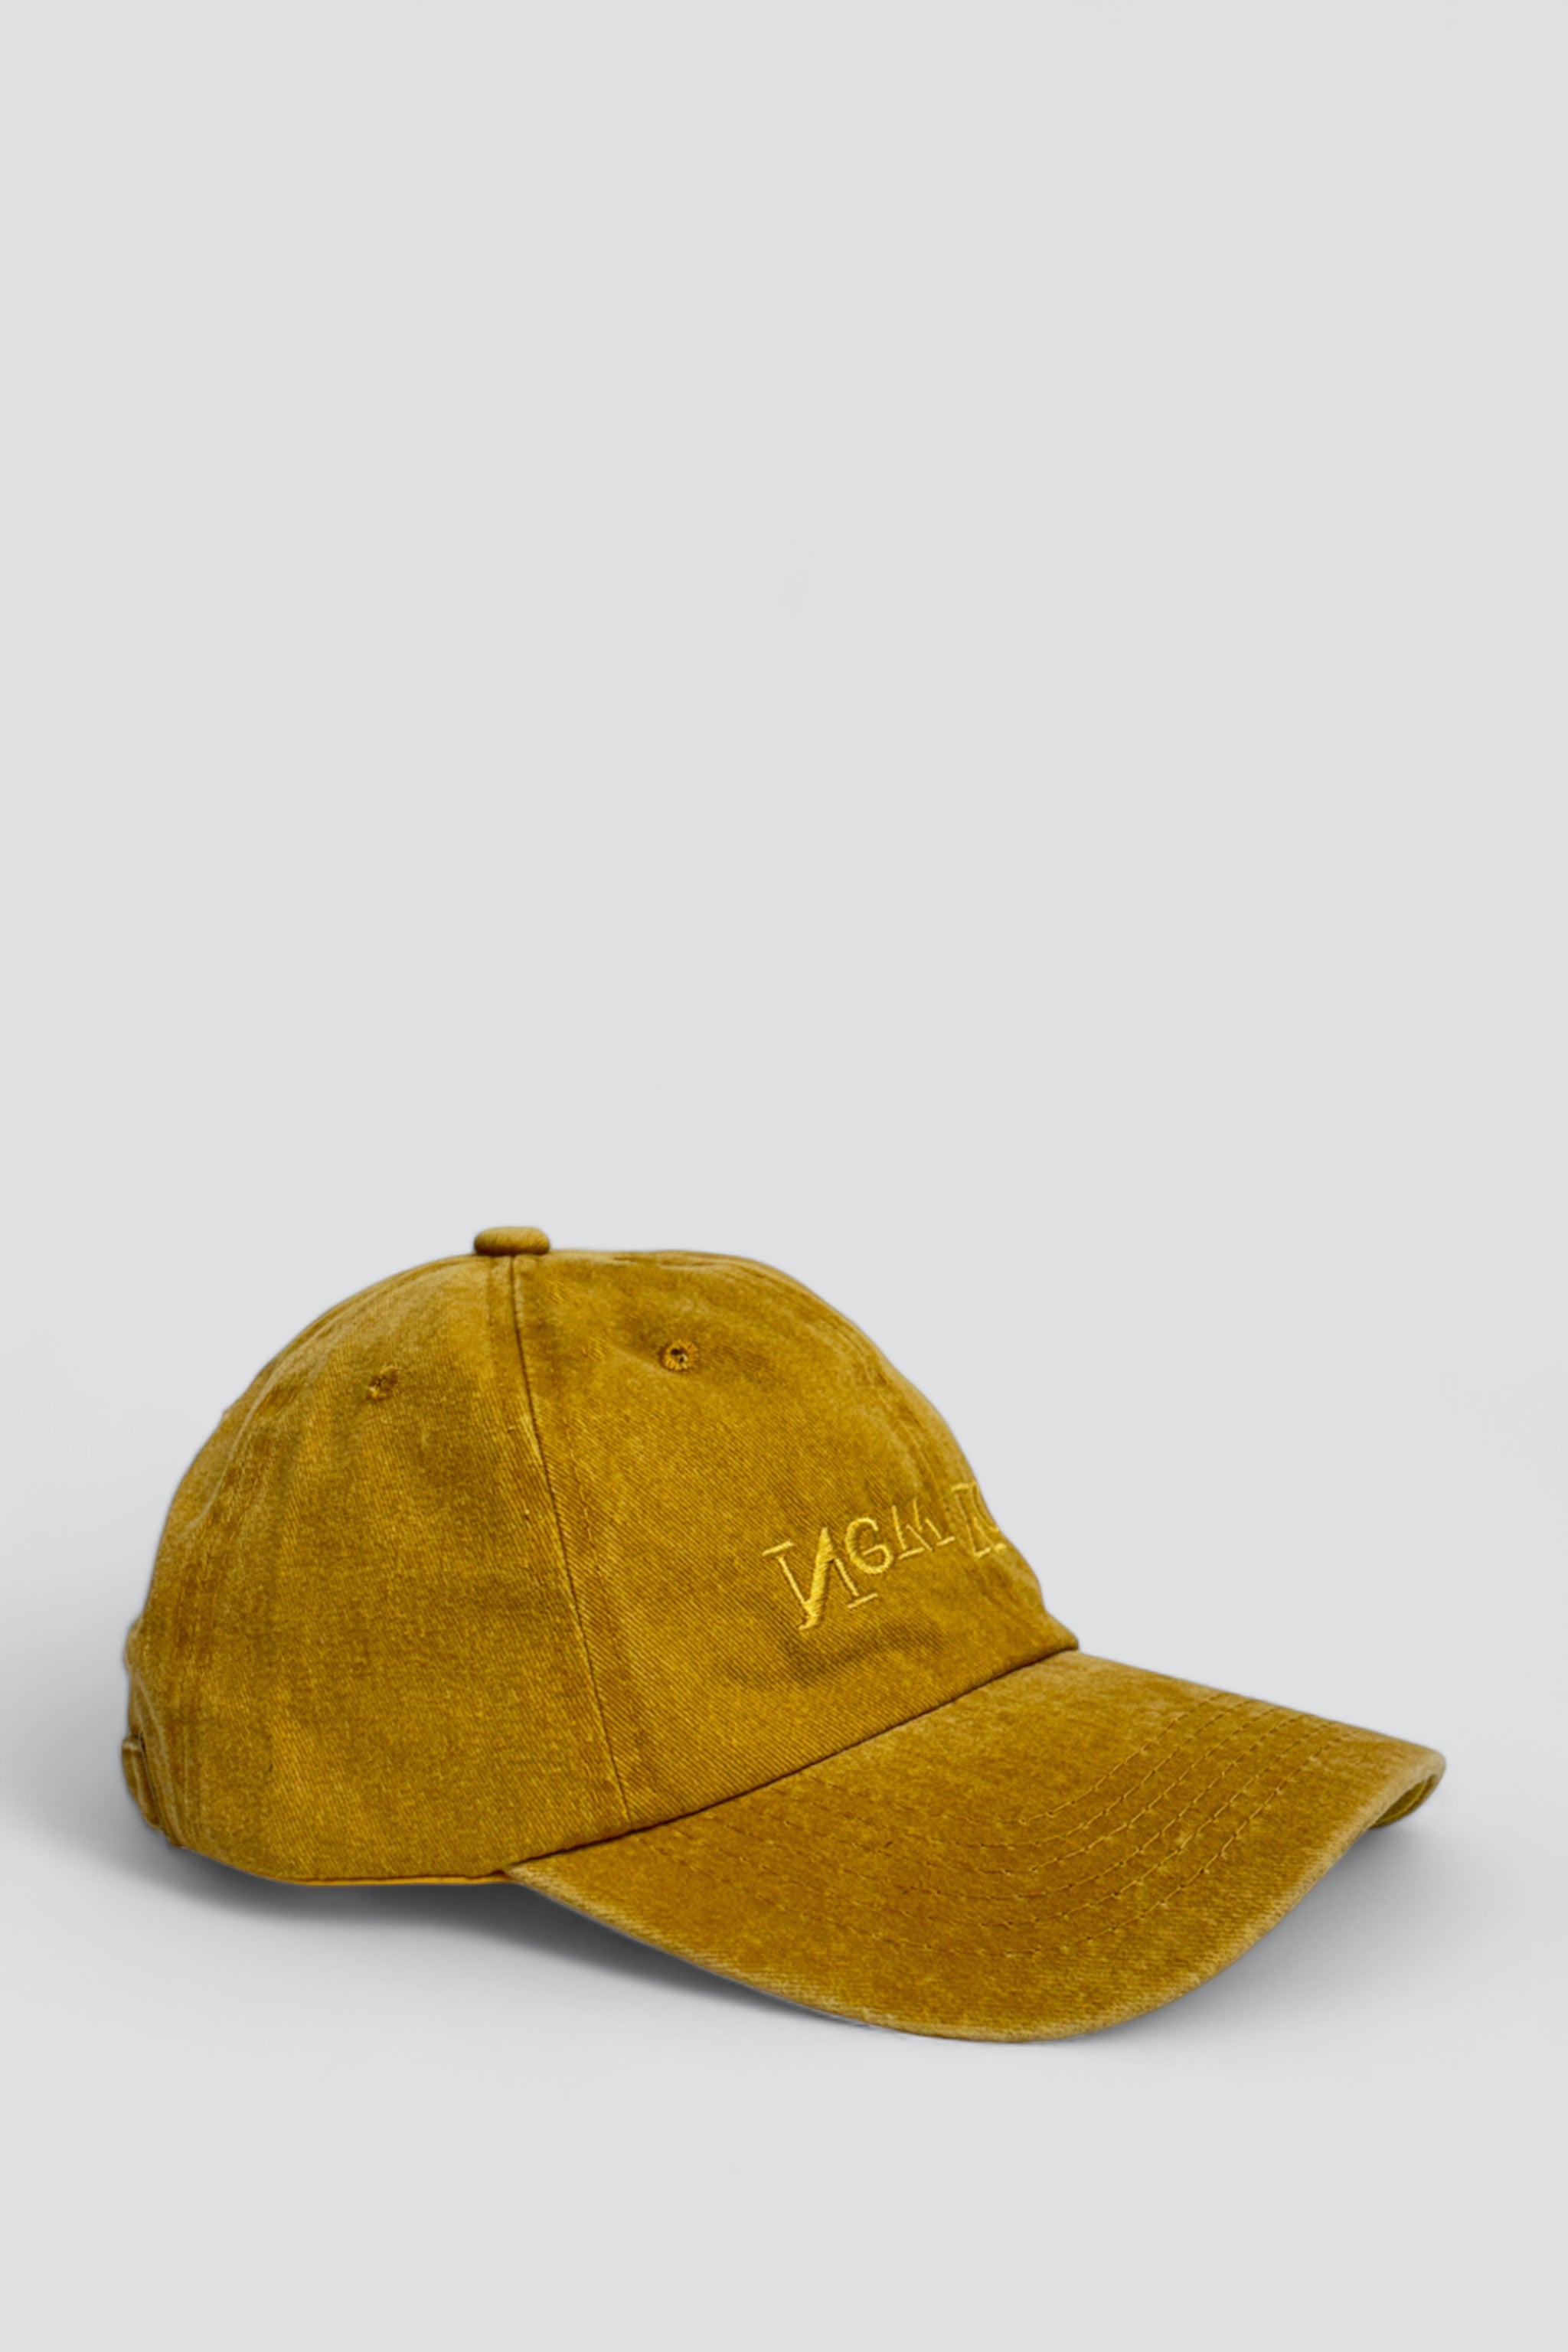 New York Embroidered Hat - Washed Yellow